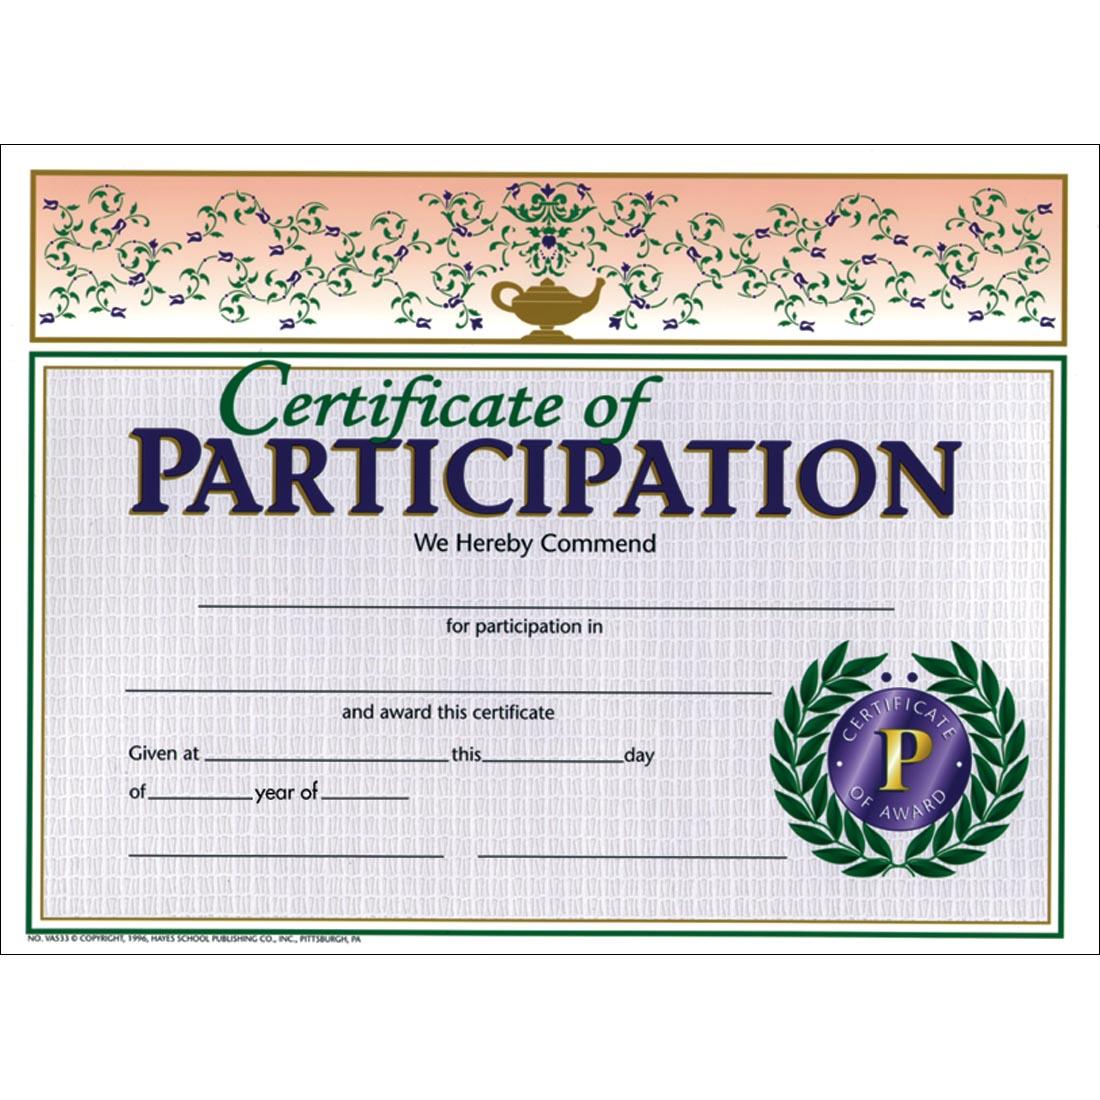 Blank Certificate of Participation